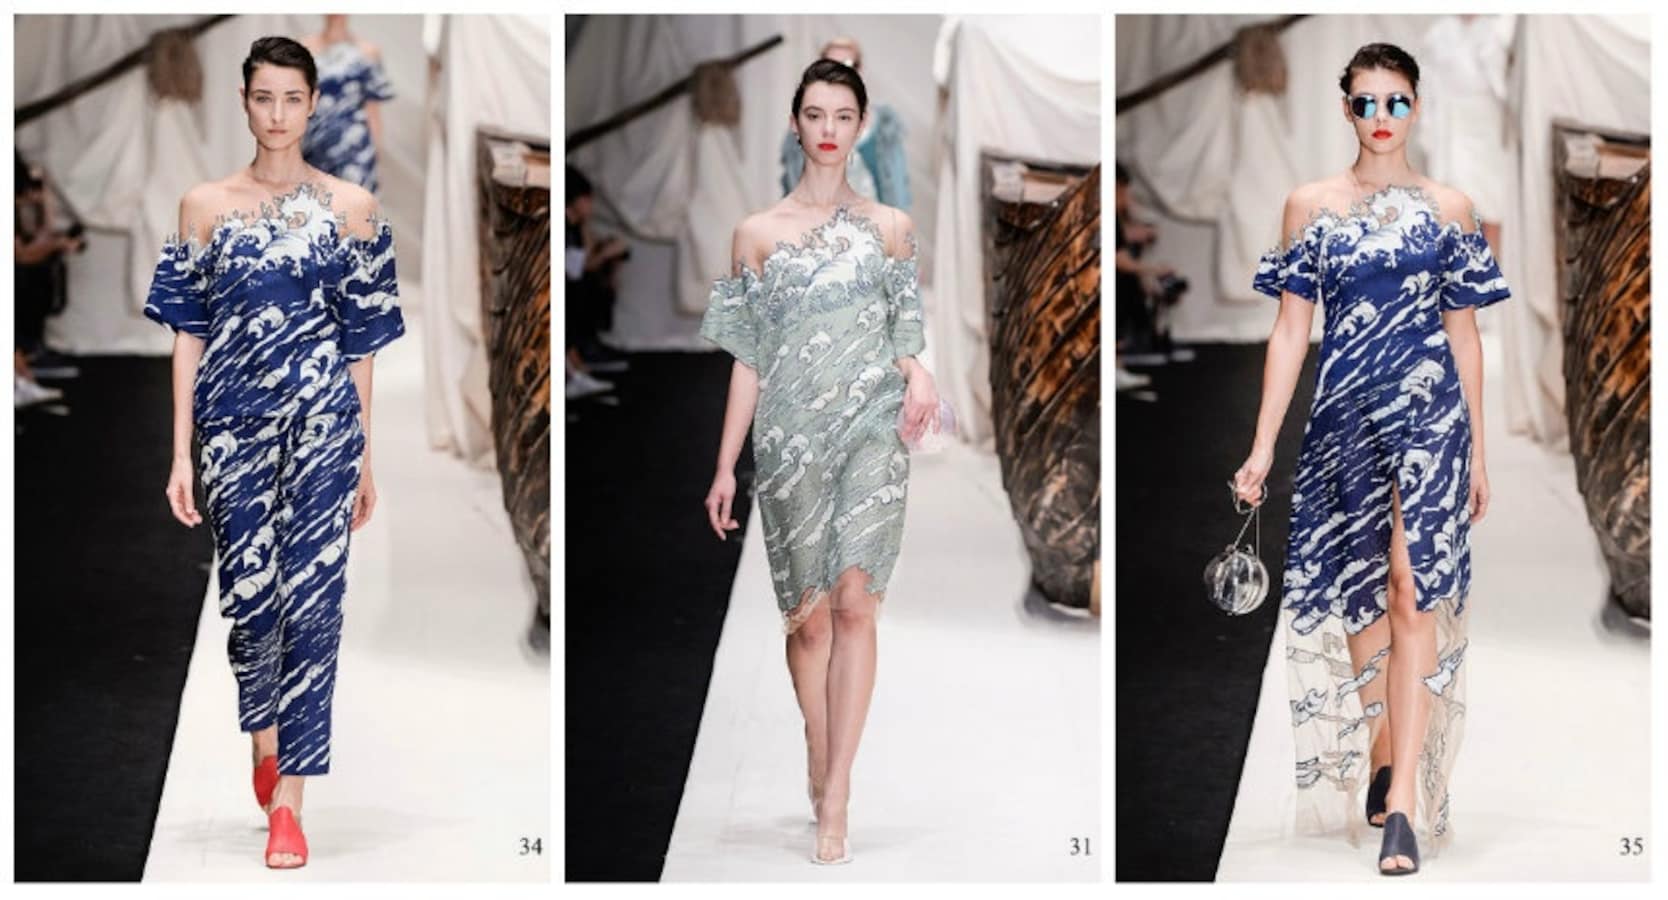 Wearable waves: Russian designer creates garments inspired by